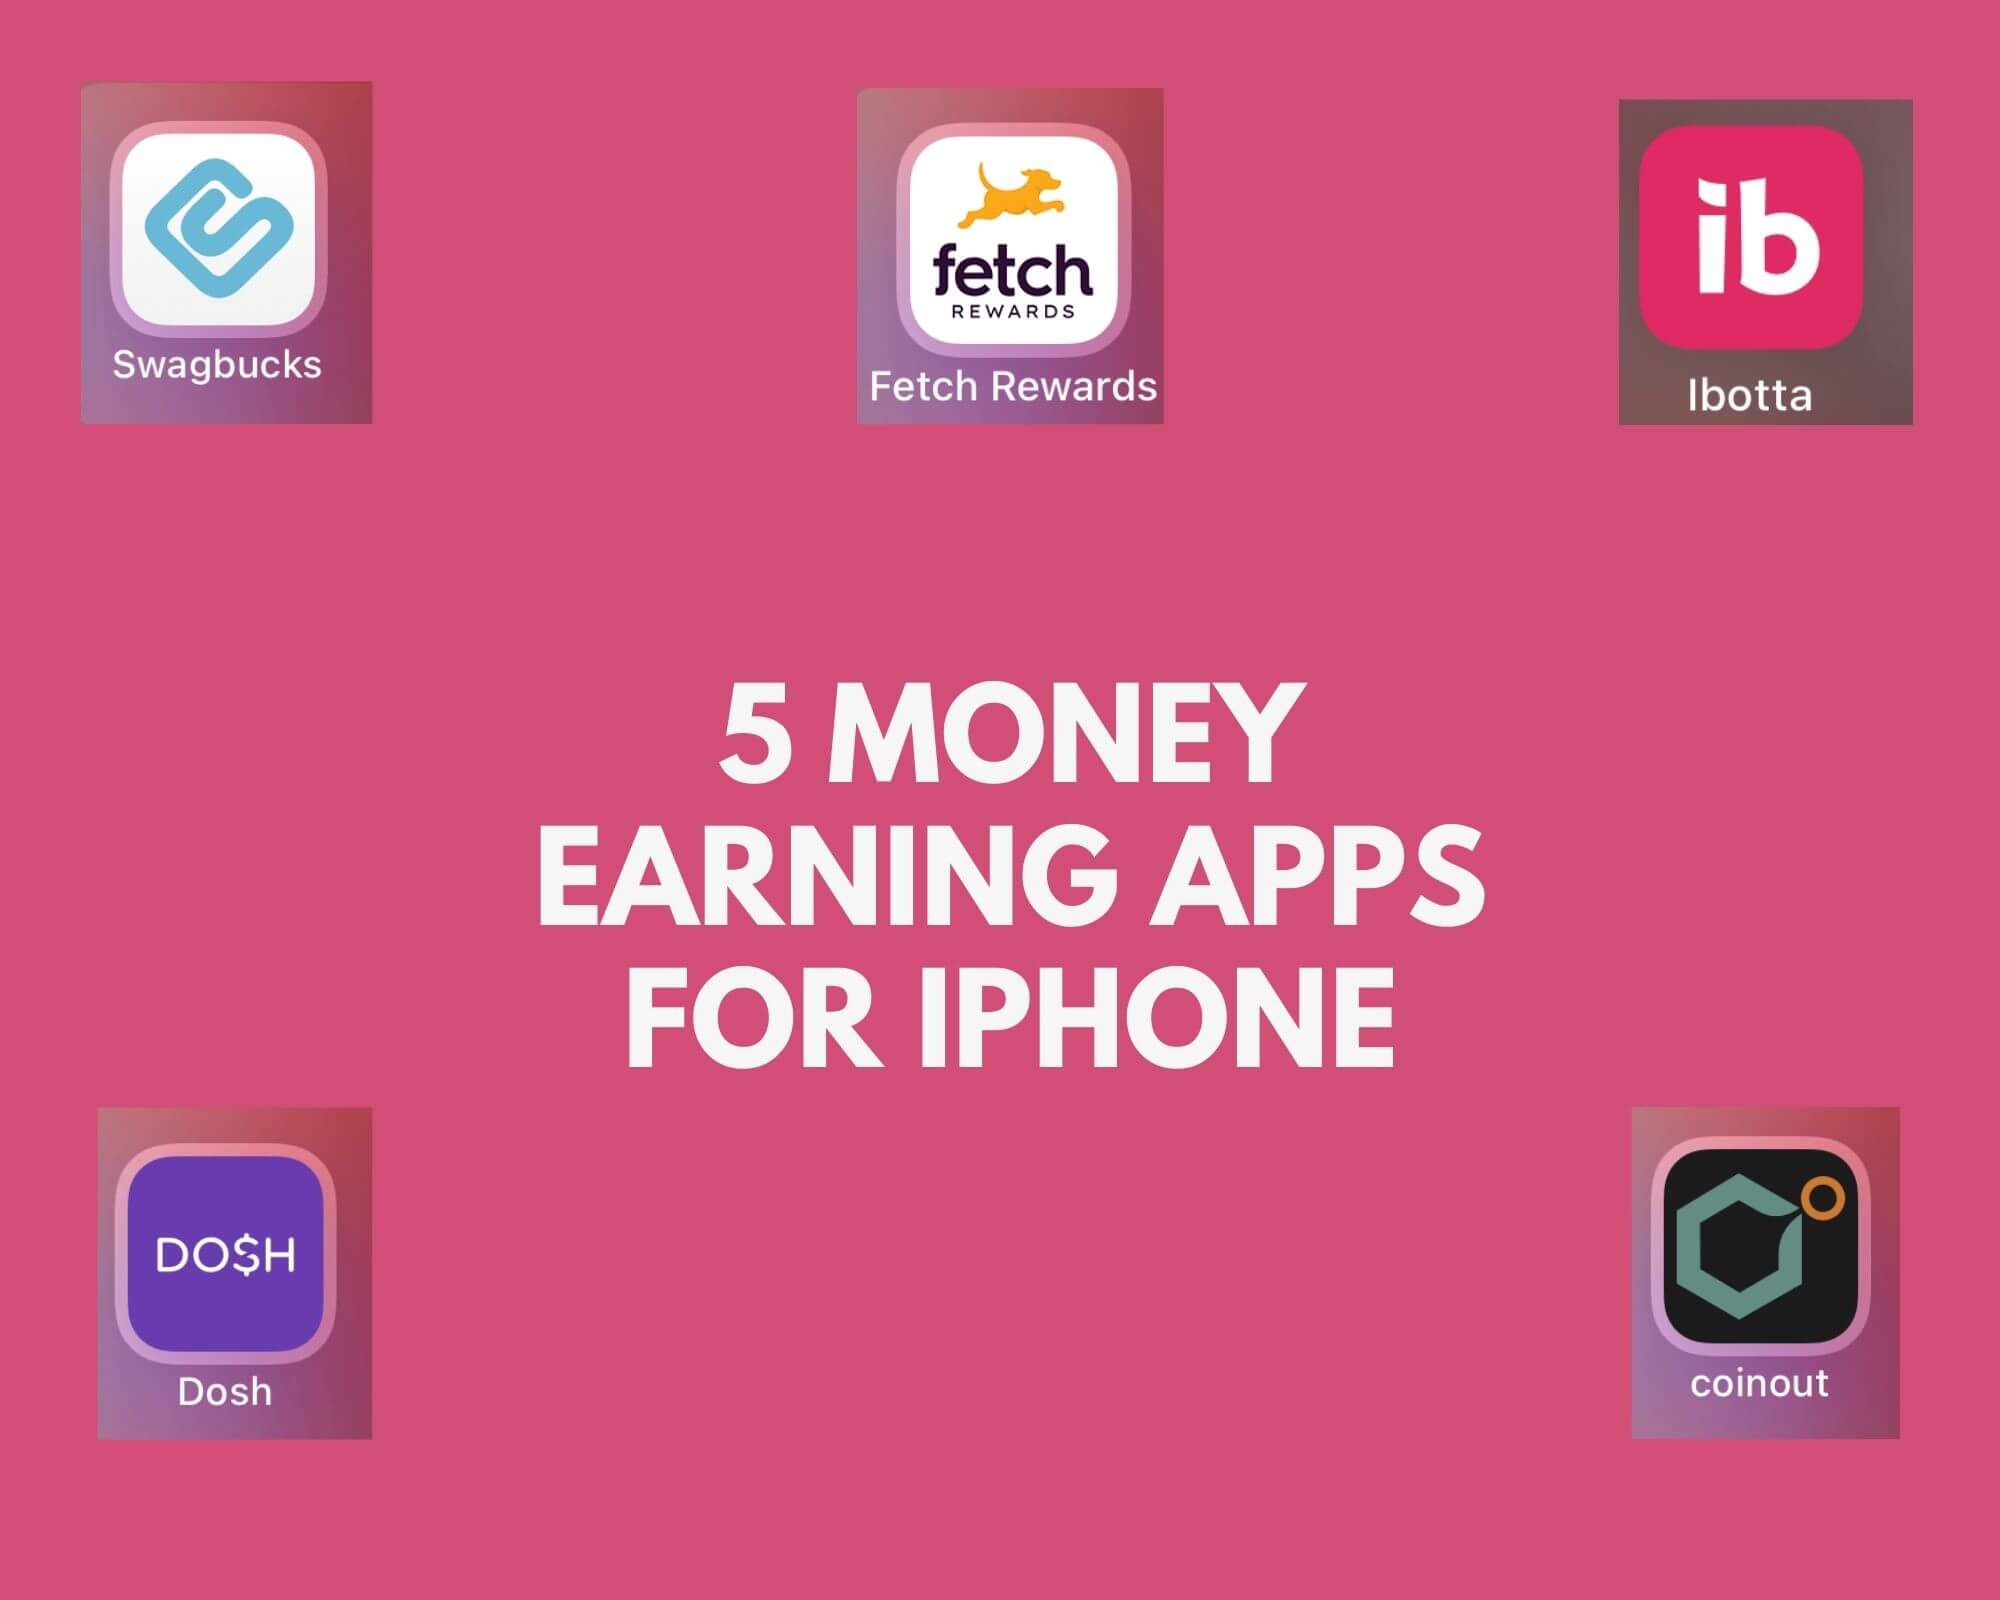 5 Money Earning Apps for iPhone